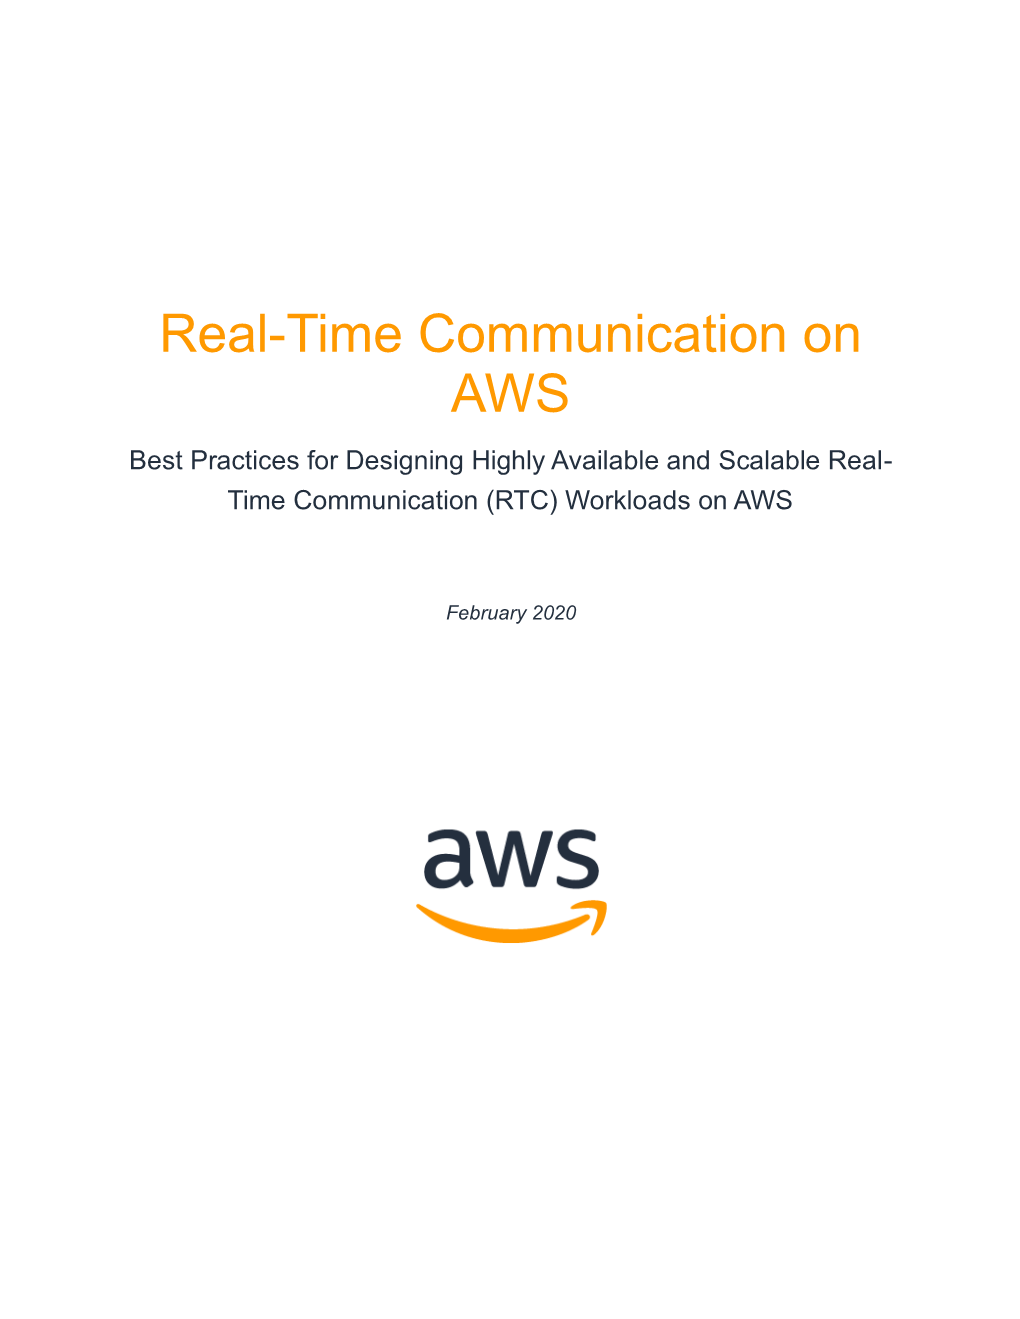 Real-Time Communication on AWS Best Practices for Designing Highly Available and Scalable Real- Time Communication (RTC) Workloads on AWS